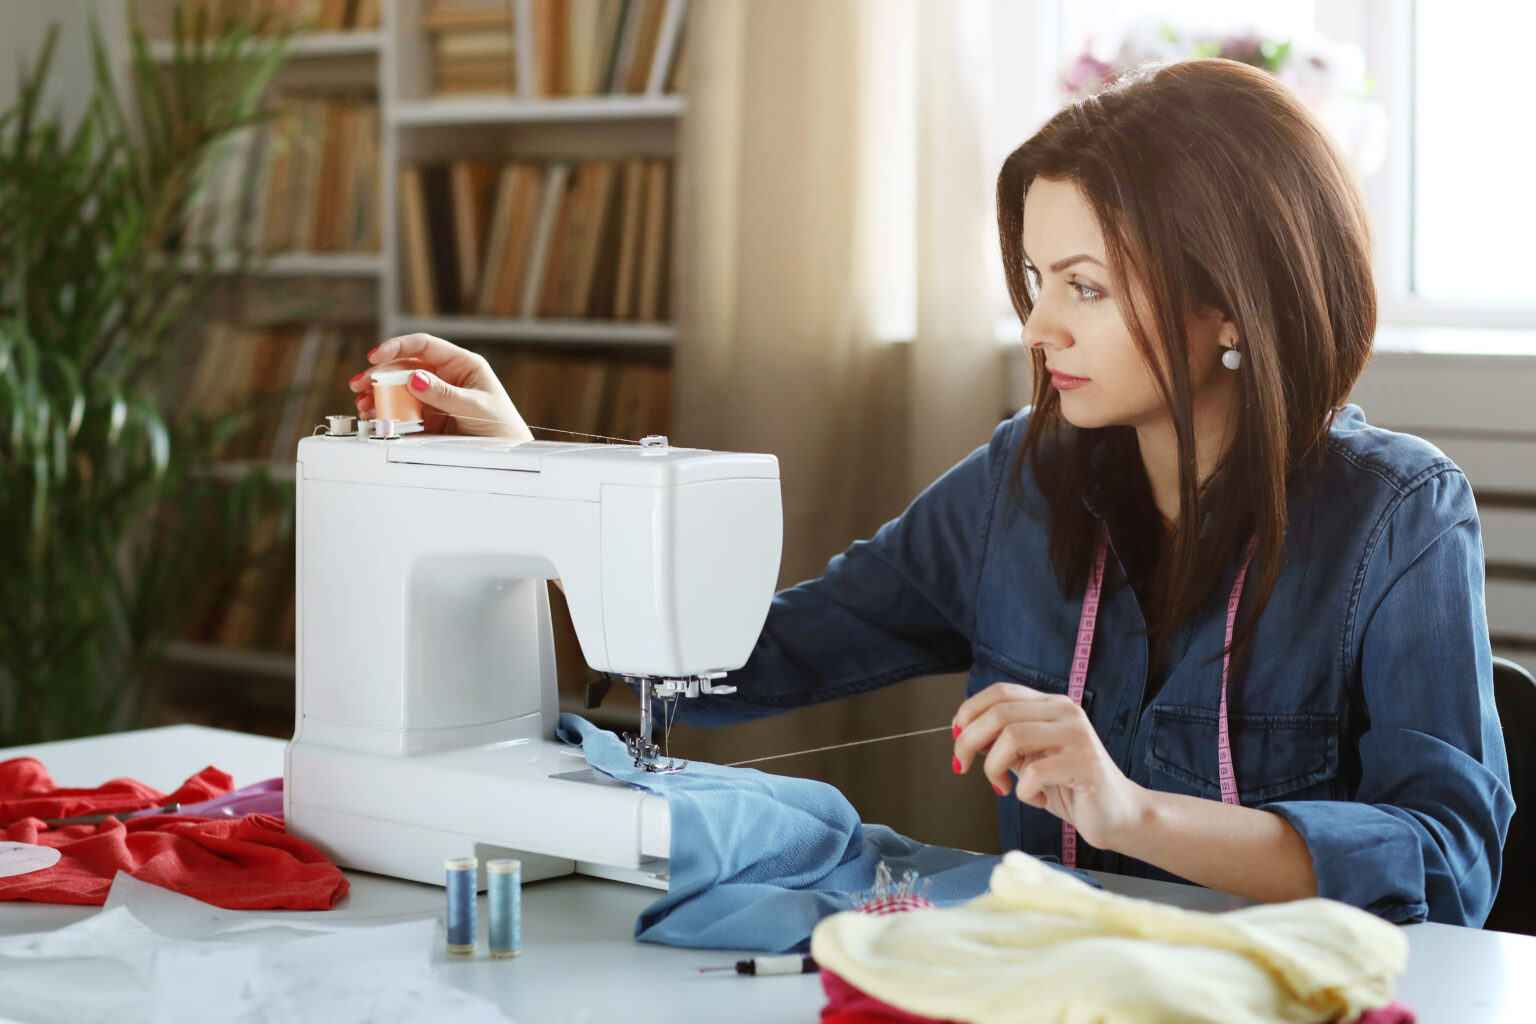 Smart Sewing Machines without Needles